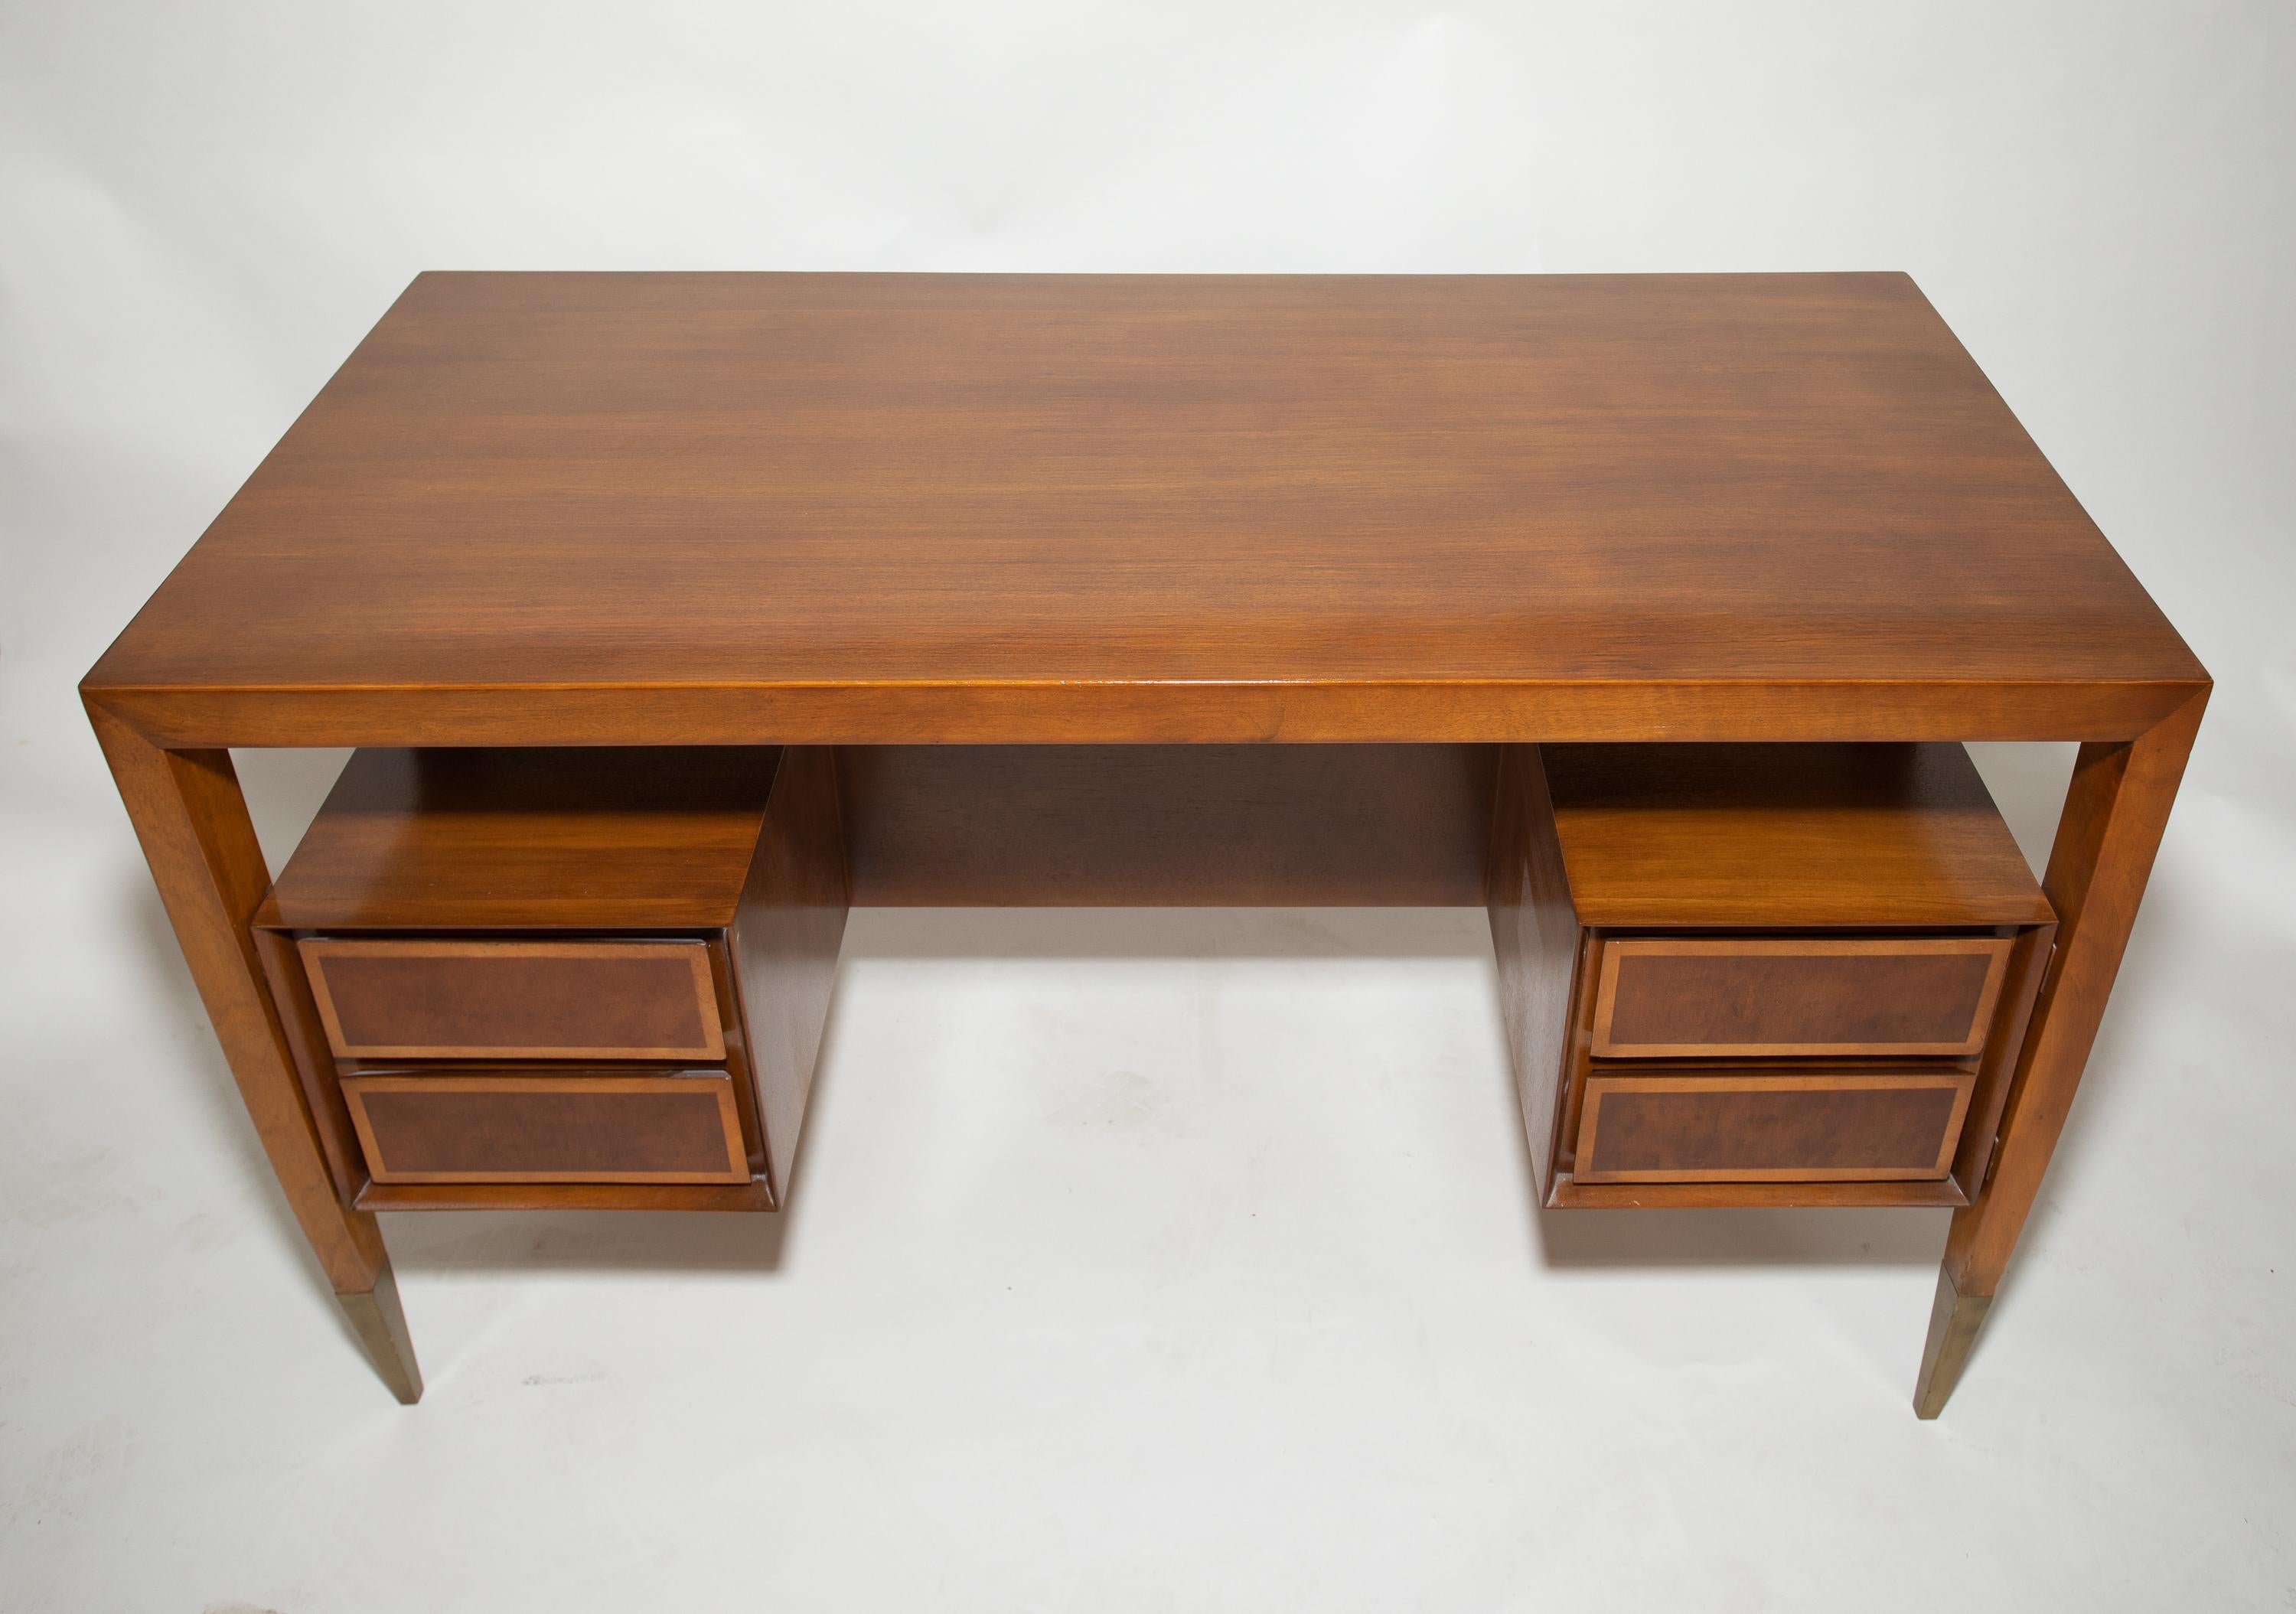 A Gio Ponti desk manufactured in Italy by Giordano Chiesa.
An early example with 2 tone drawer fronts.
Purchased at the Singer Showroom in NYC.
Purchased from the original family ownership.